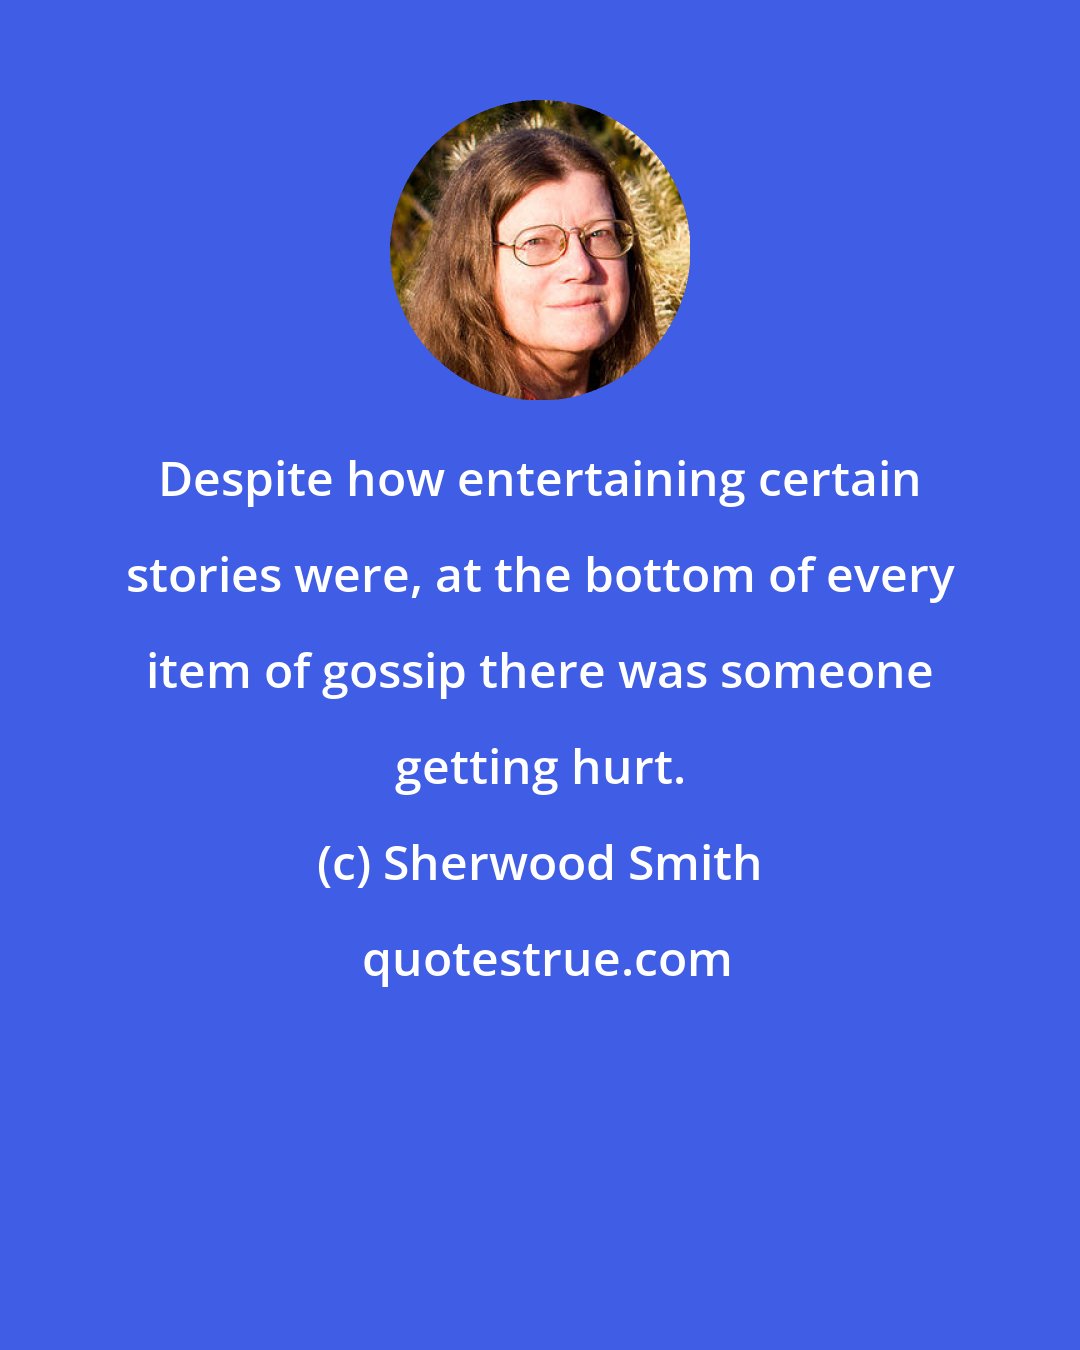 Sherwood Smith: Despite how entertaining certain stories were, at the bottom of every item of gossip there was someone getting hurt.